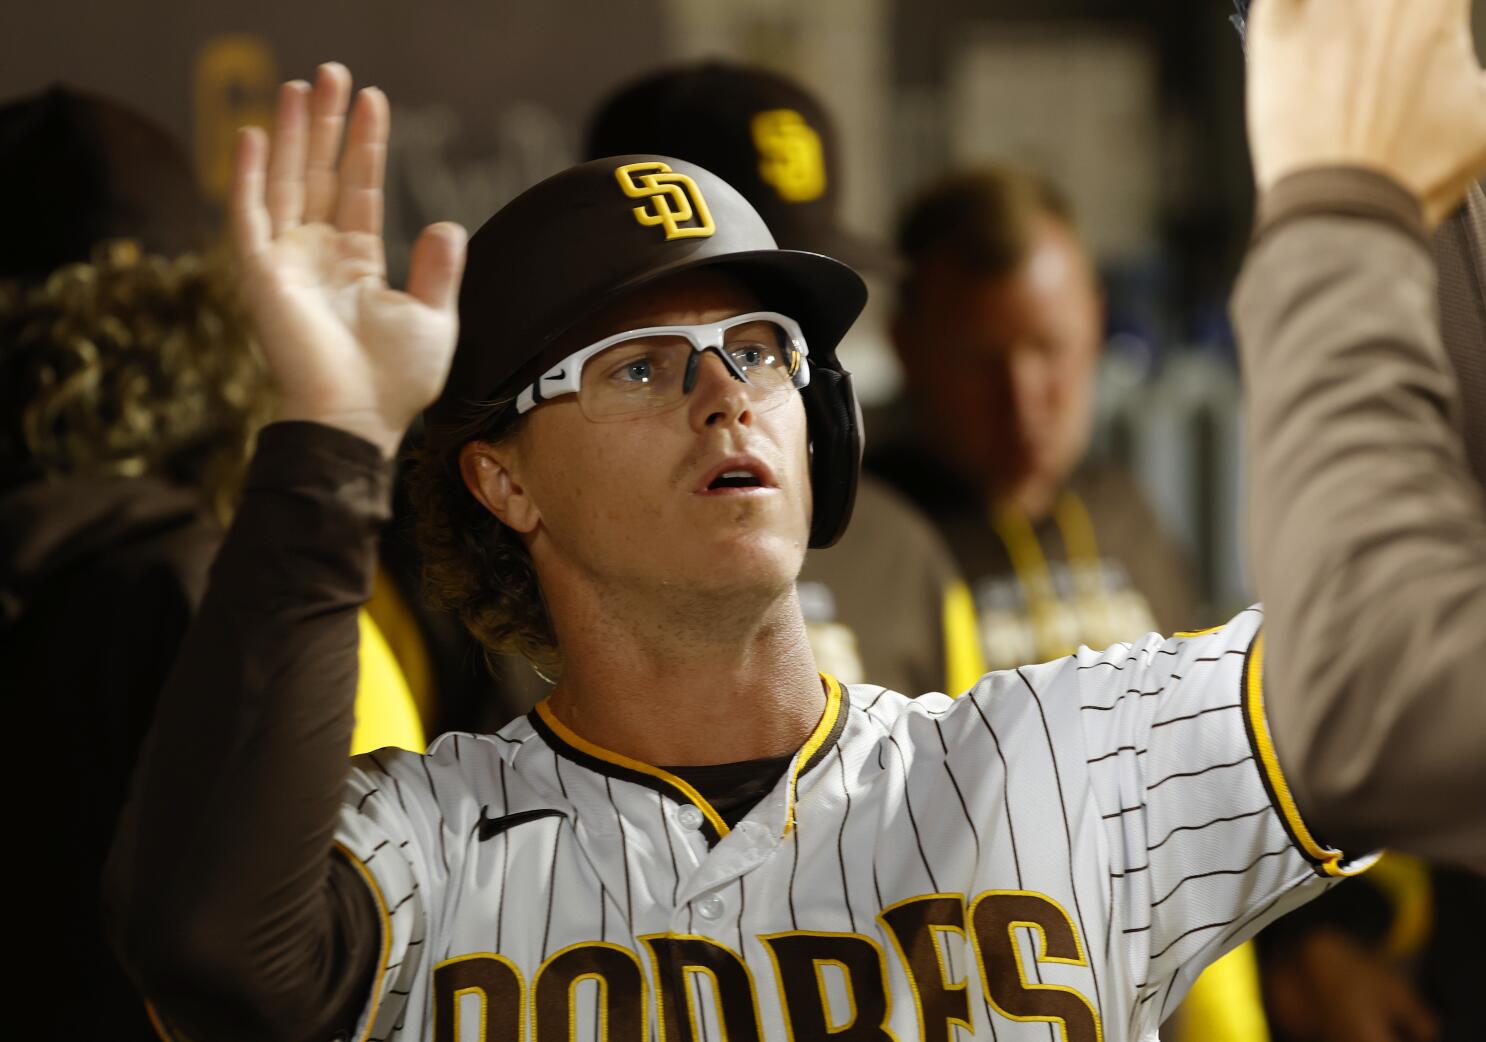 Sully Baseball: The Pirates Alternate Unis Are Awesome